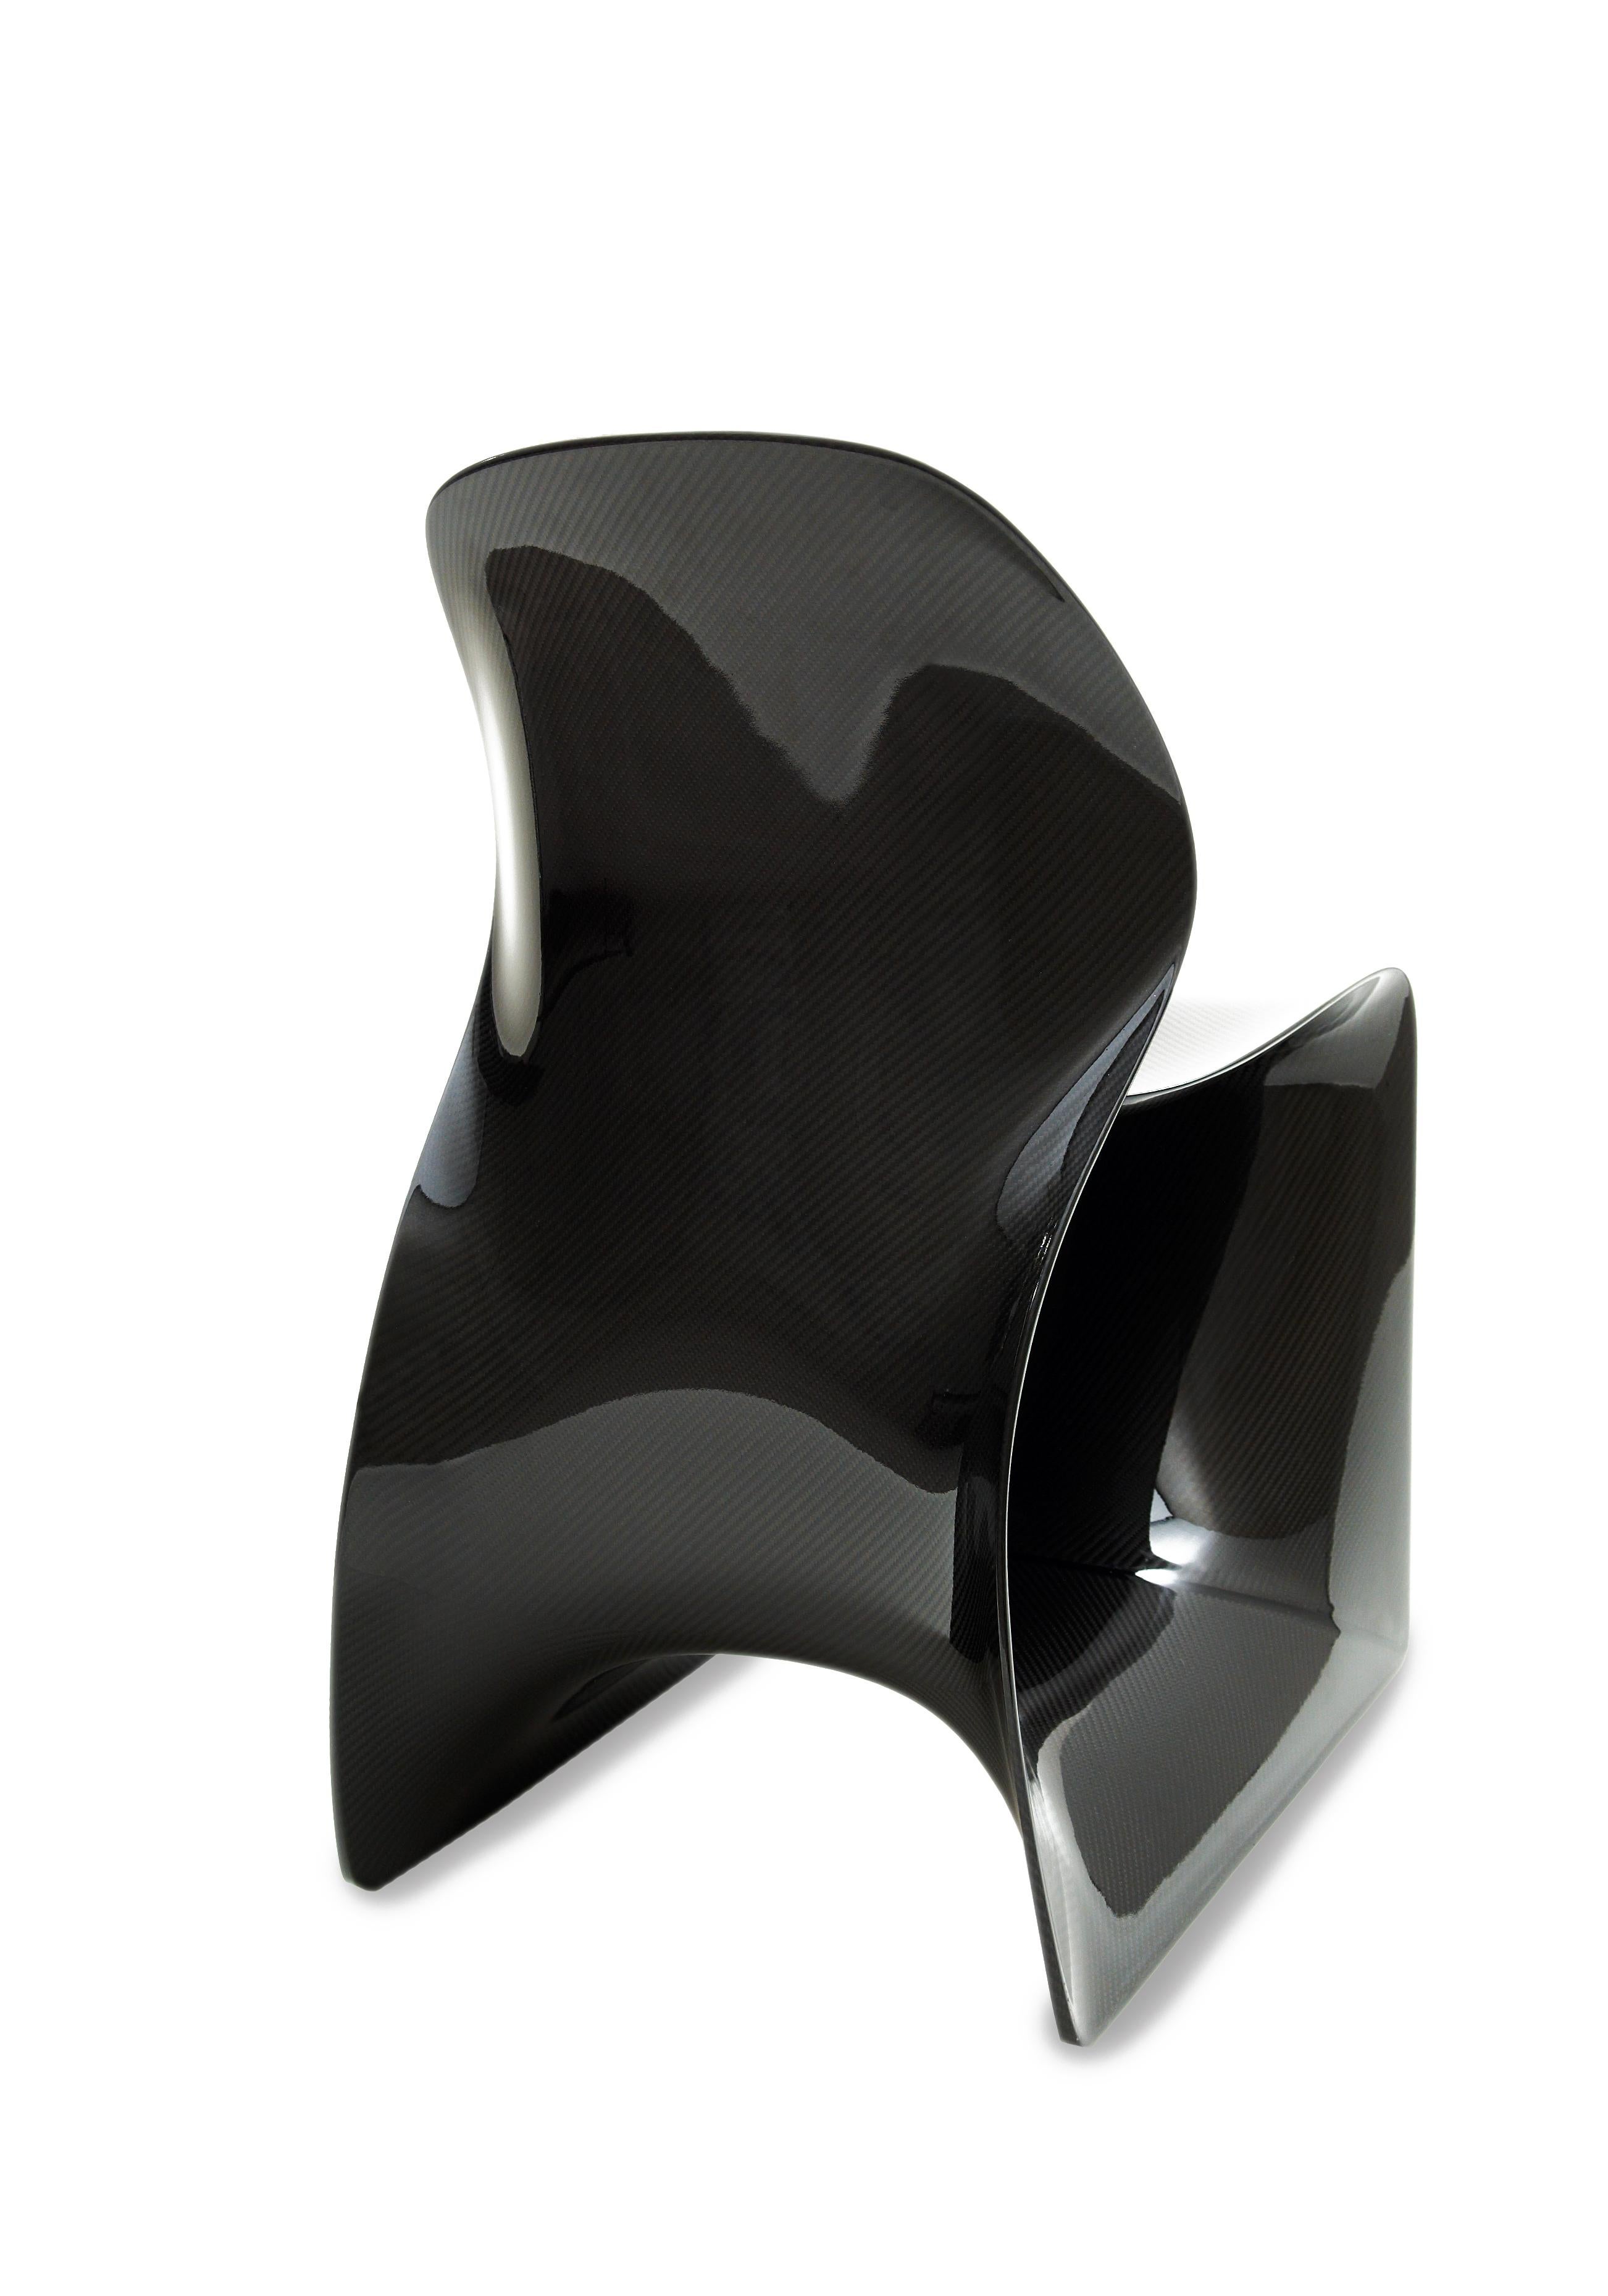 The organic curves and gravity-defying cantilever of the Moot chair are a result of Ross Lovegrove’s continuing fascination with carbon fibre; a light, high-strength material used by aircraft and racing engineers. The complex curvature could not be